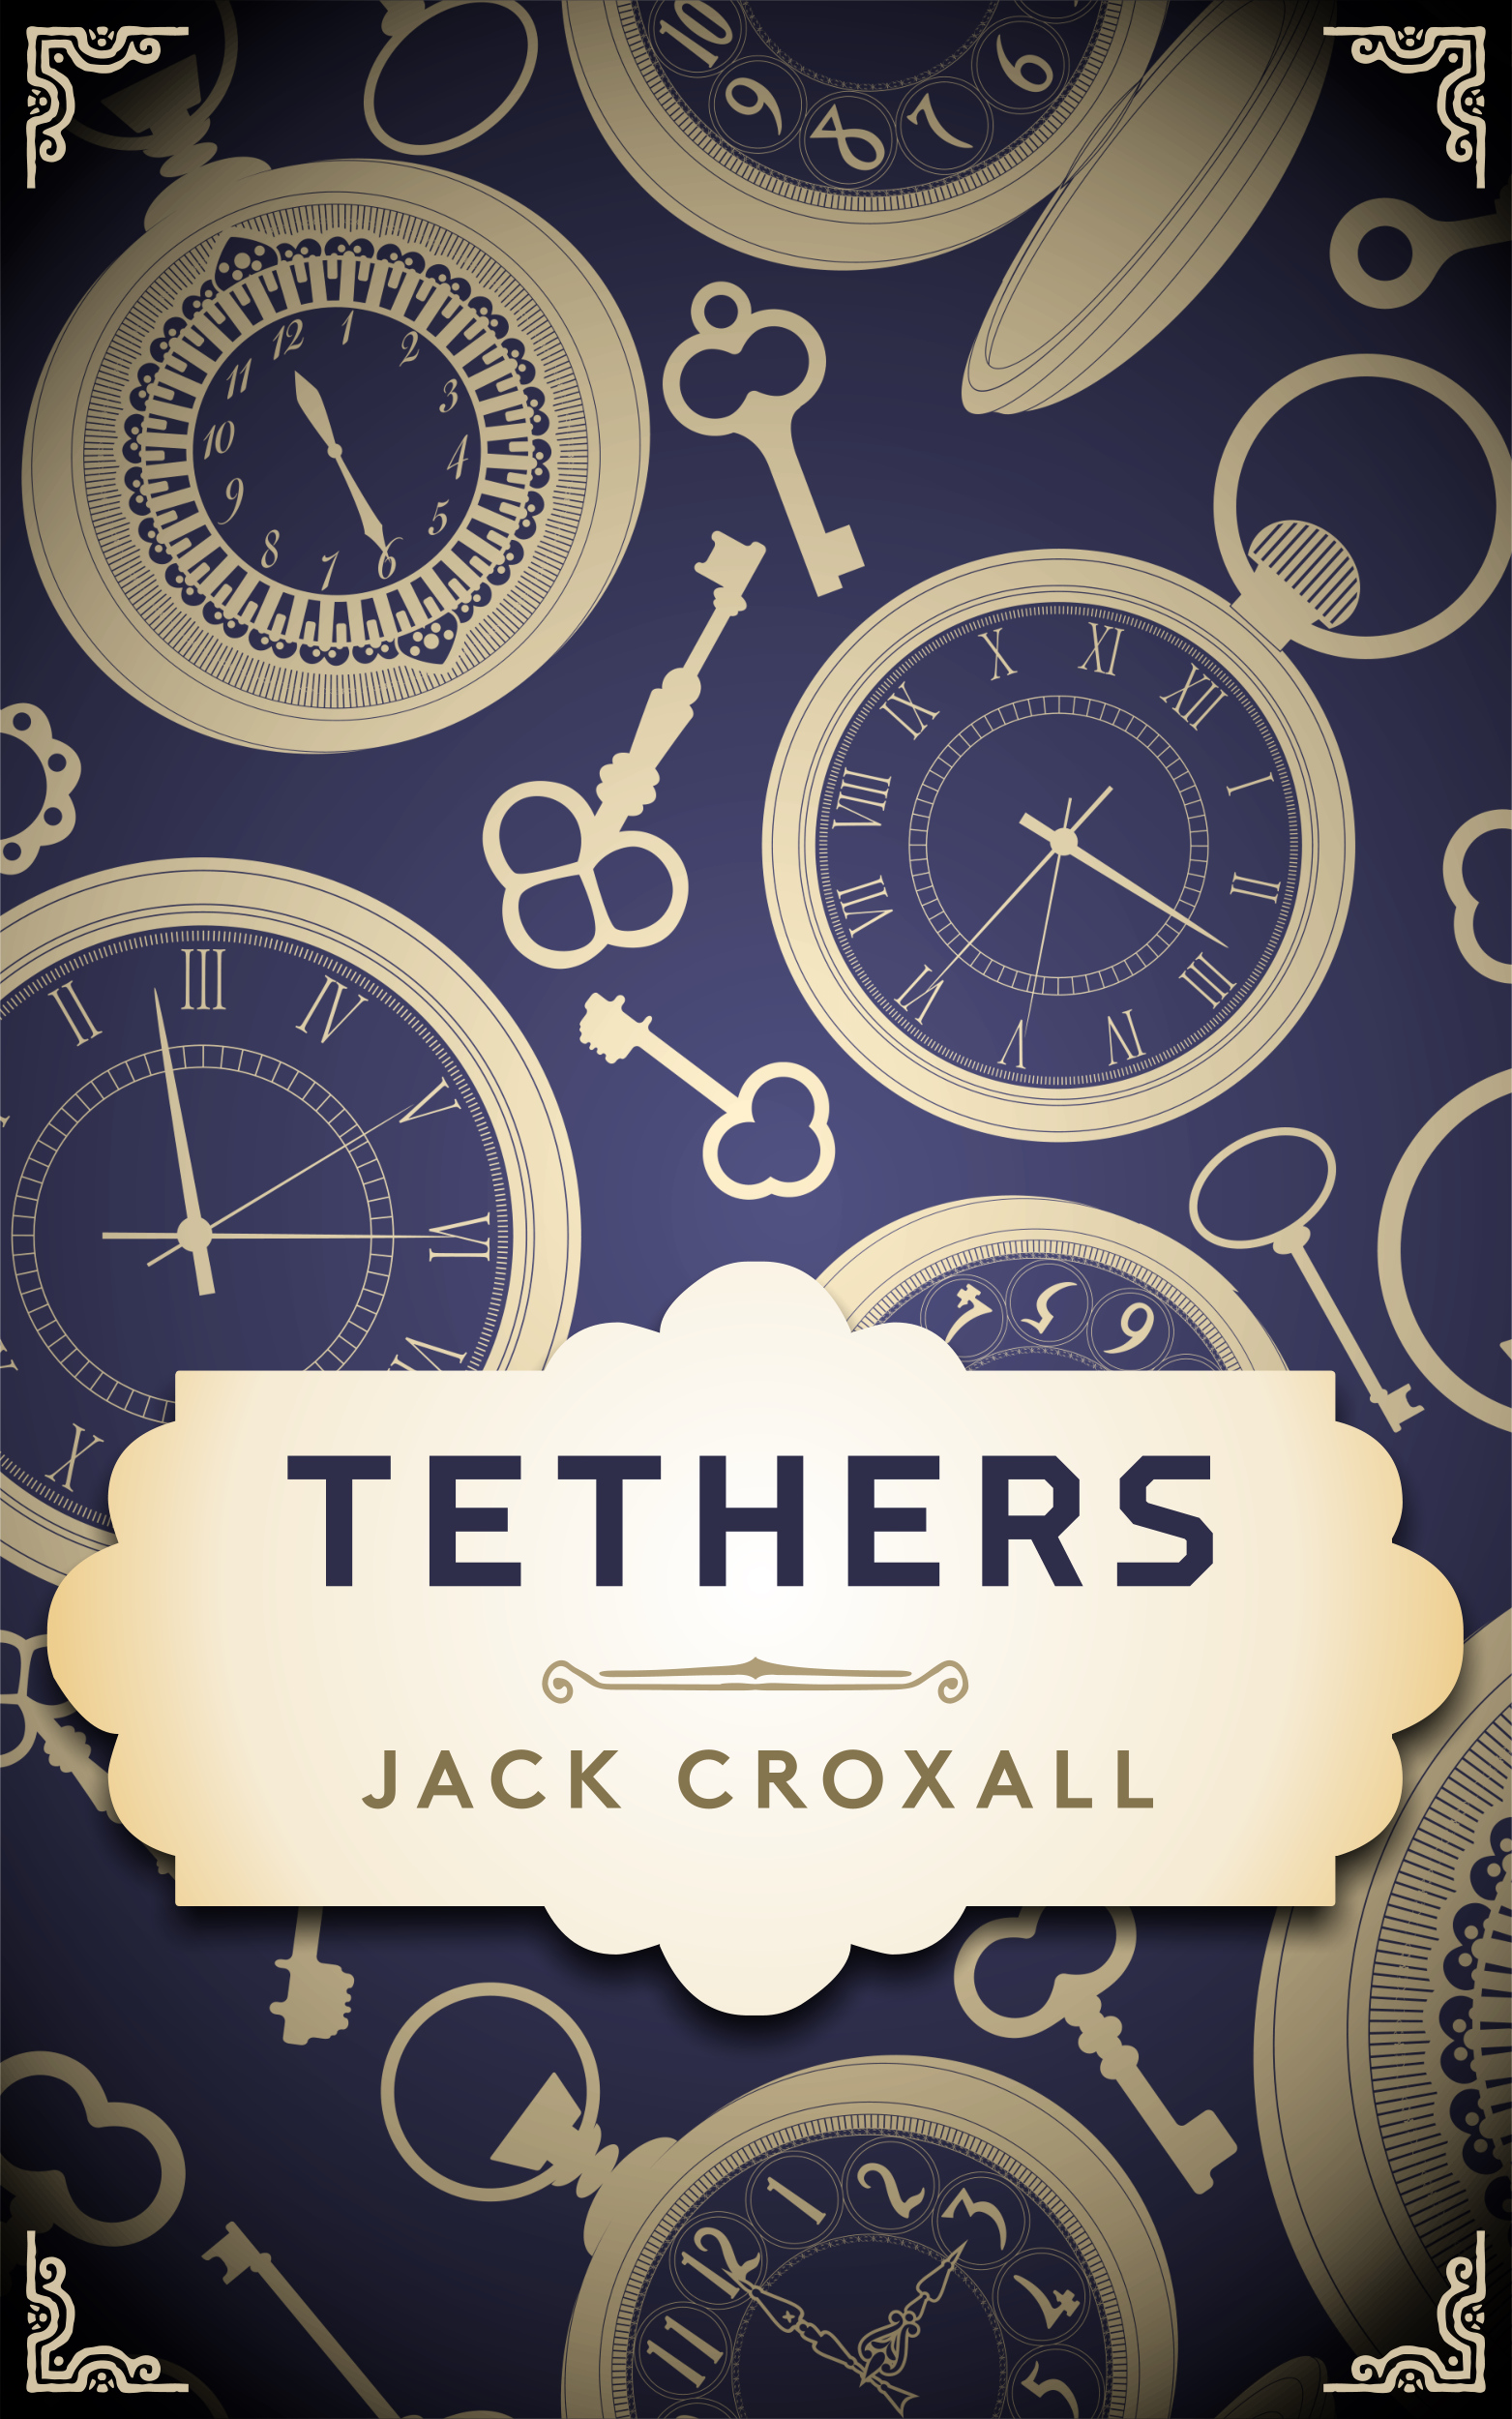 FREE: Tethers by Jack Croxall